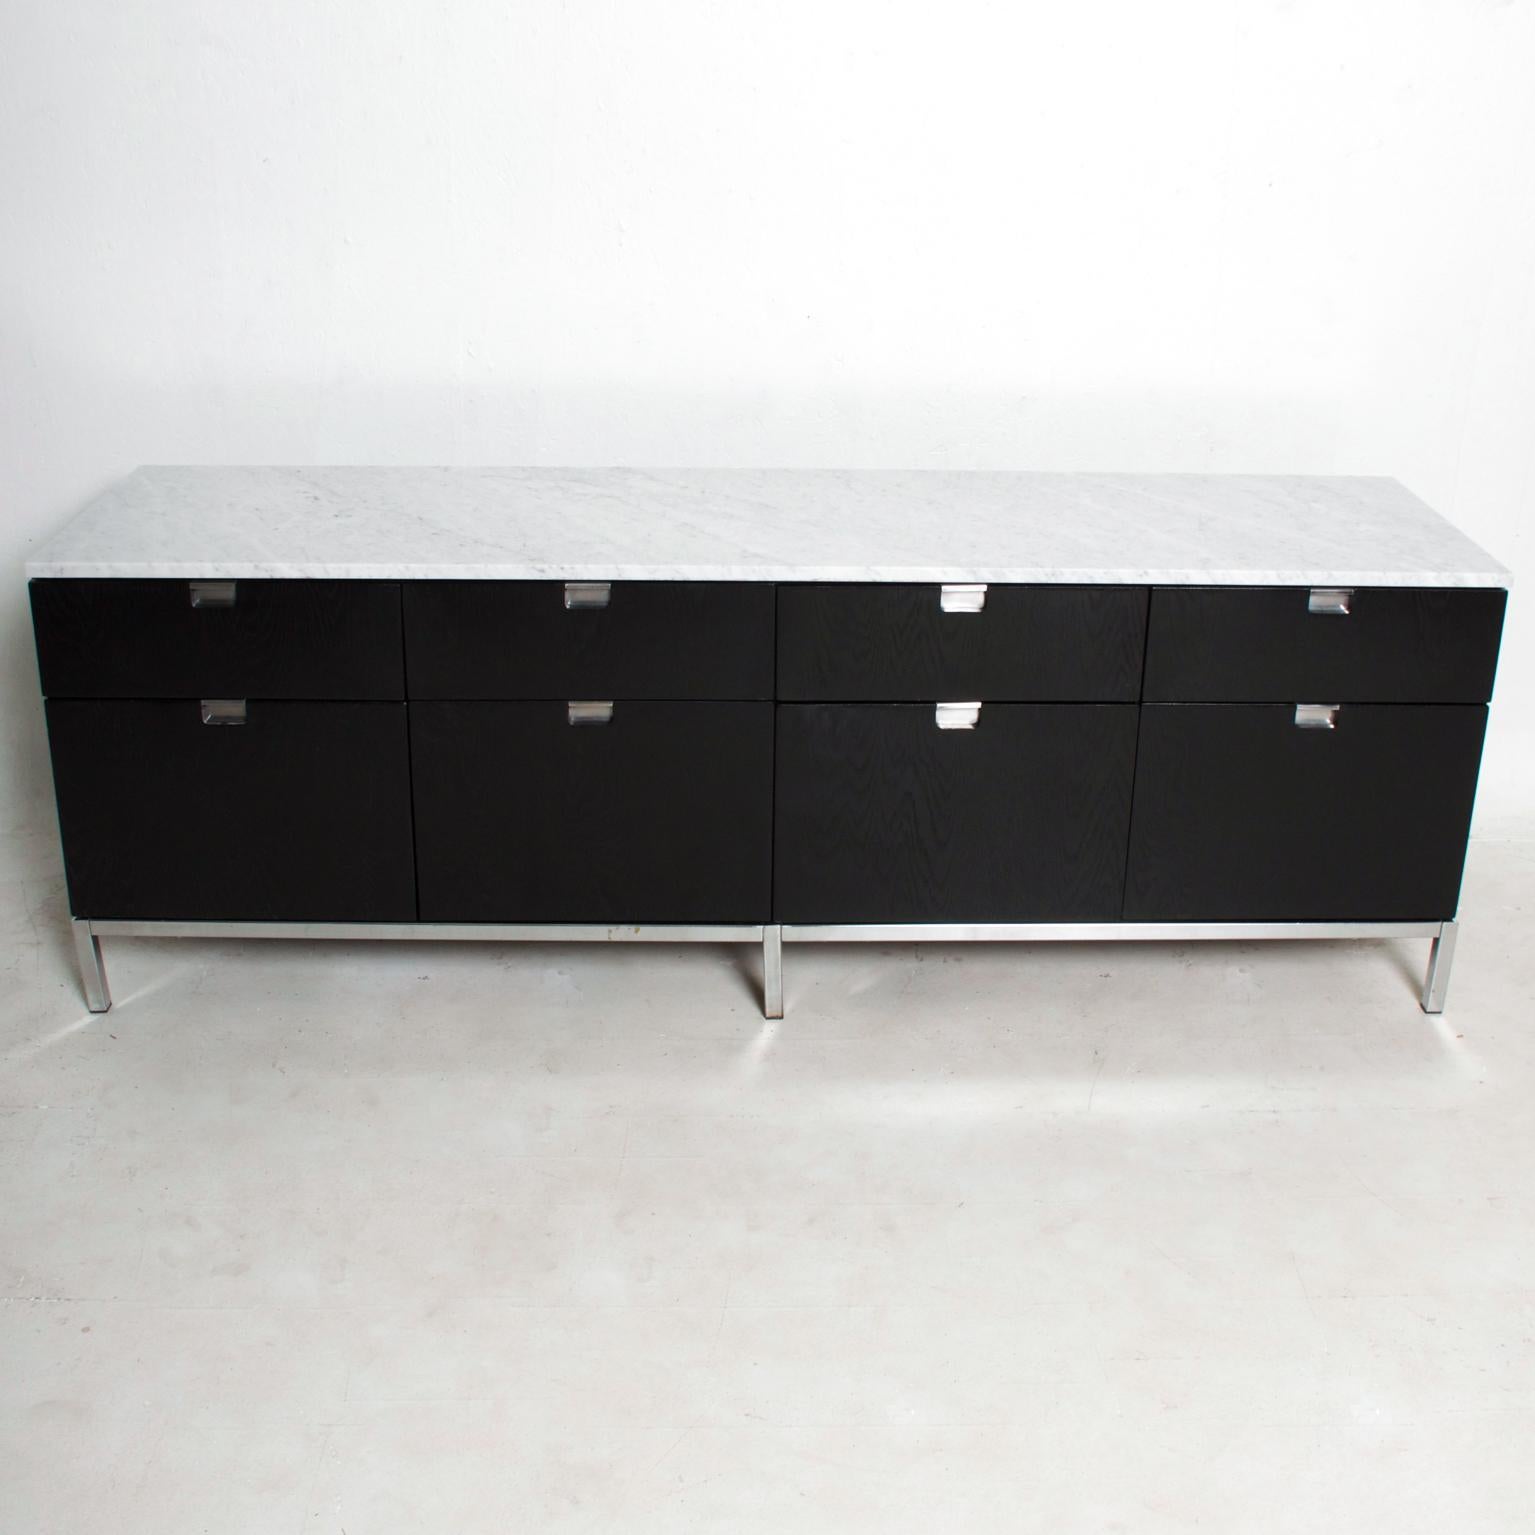 American Fabulous Florence Knoll Black Oak Credenza Cabinet in White Carrera Marble 1960s